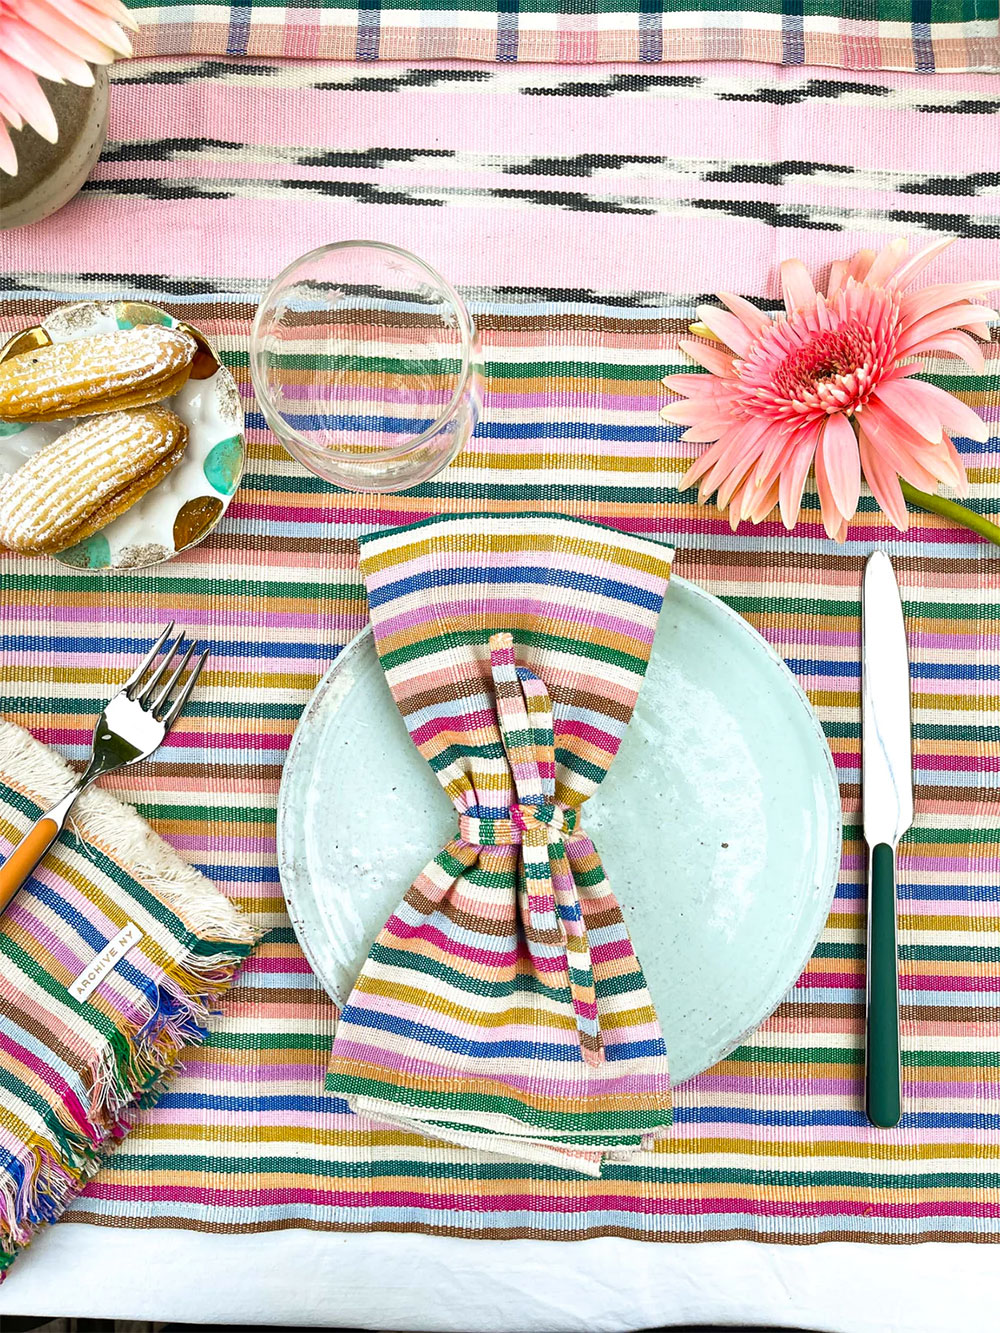 Archive's rainbow napkins and table runner